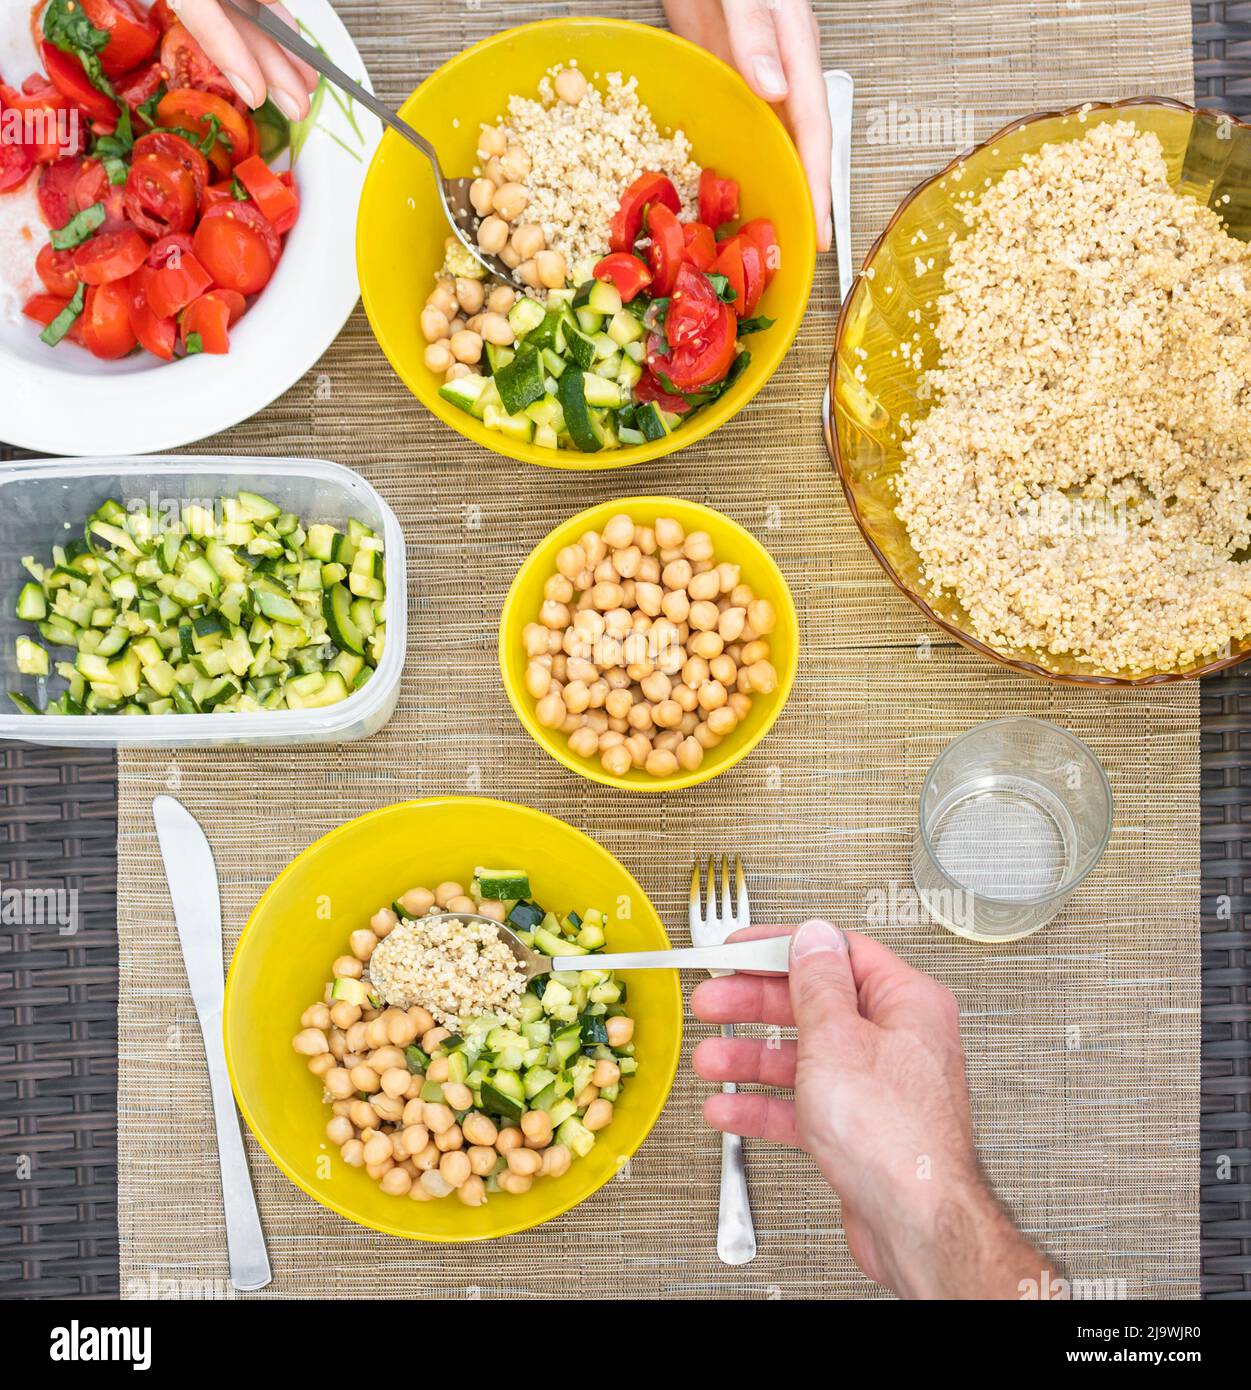 People eating a vegan meal Stock Photo